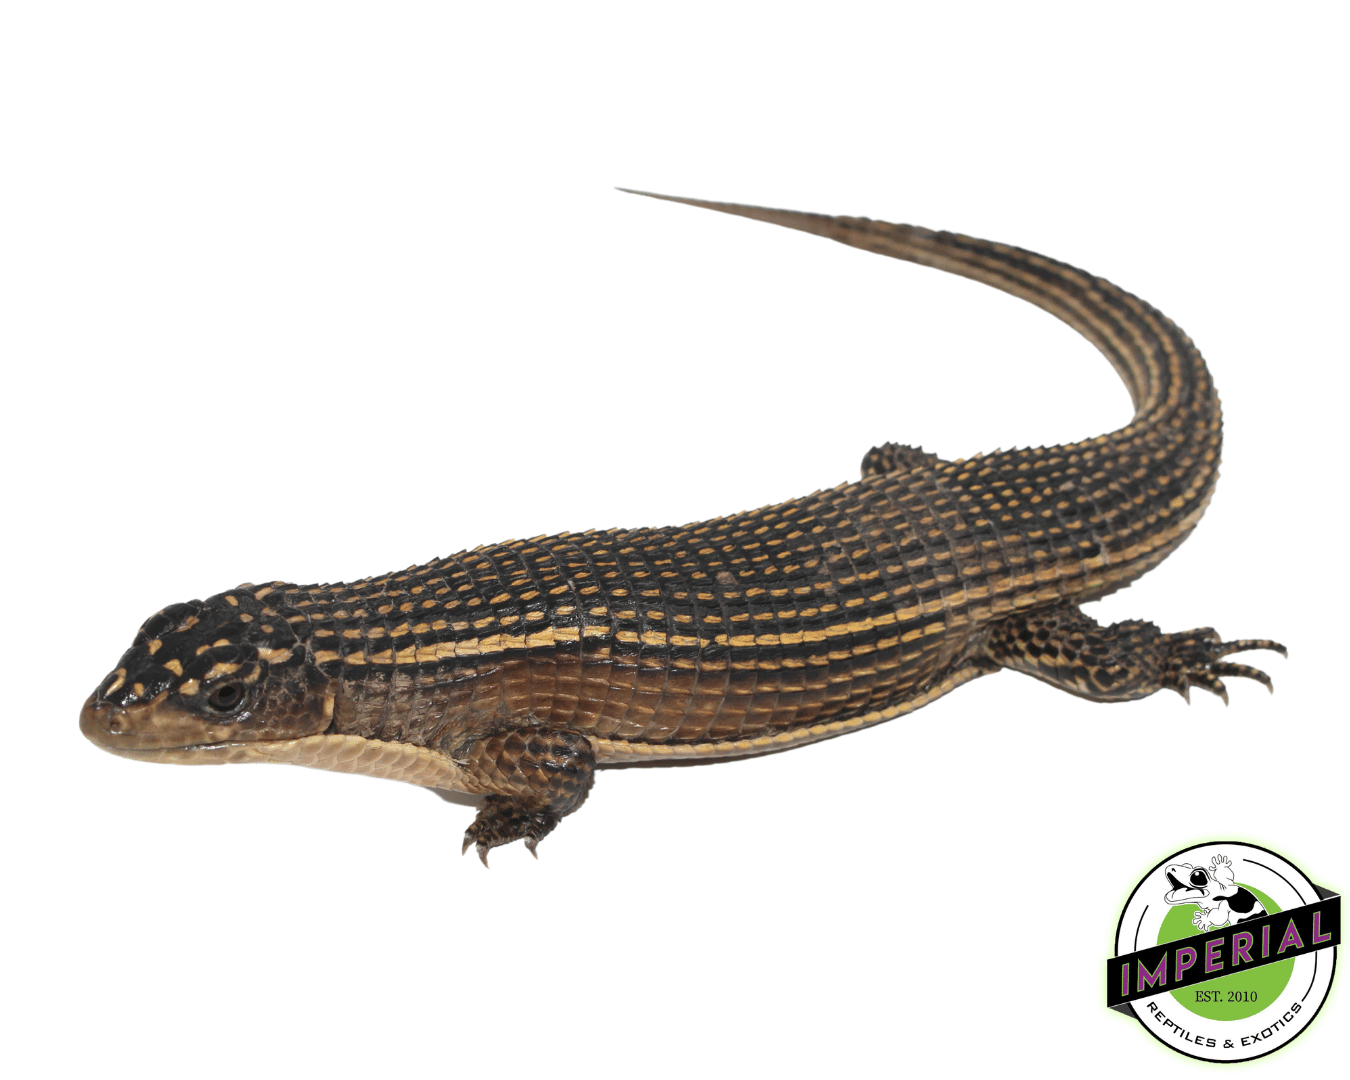 giant plated lizard for sale, buy reptiles online